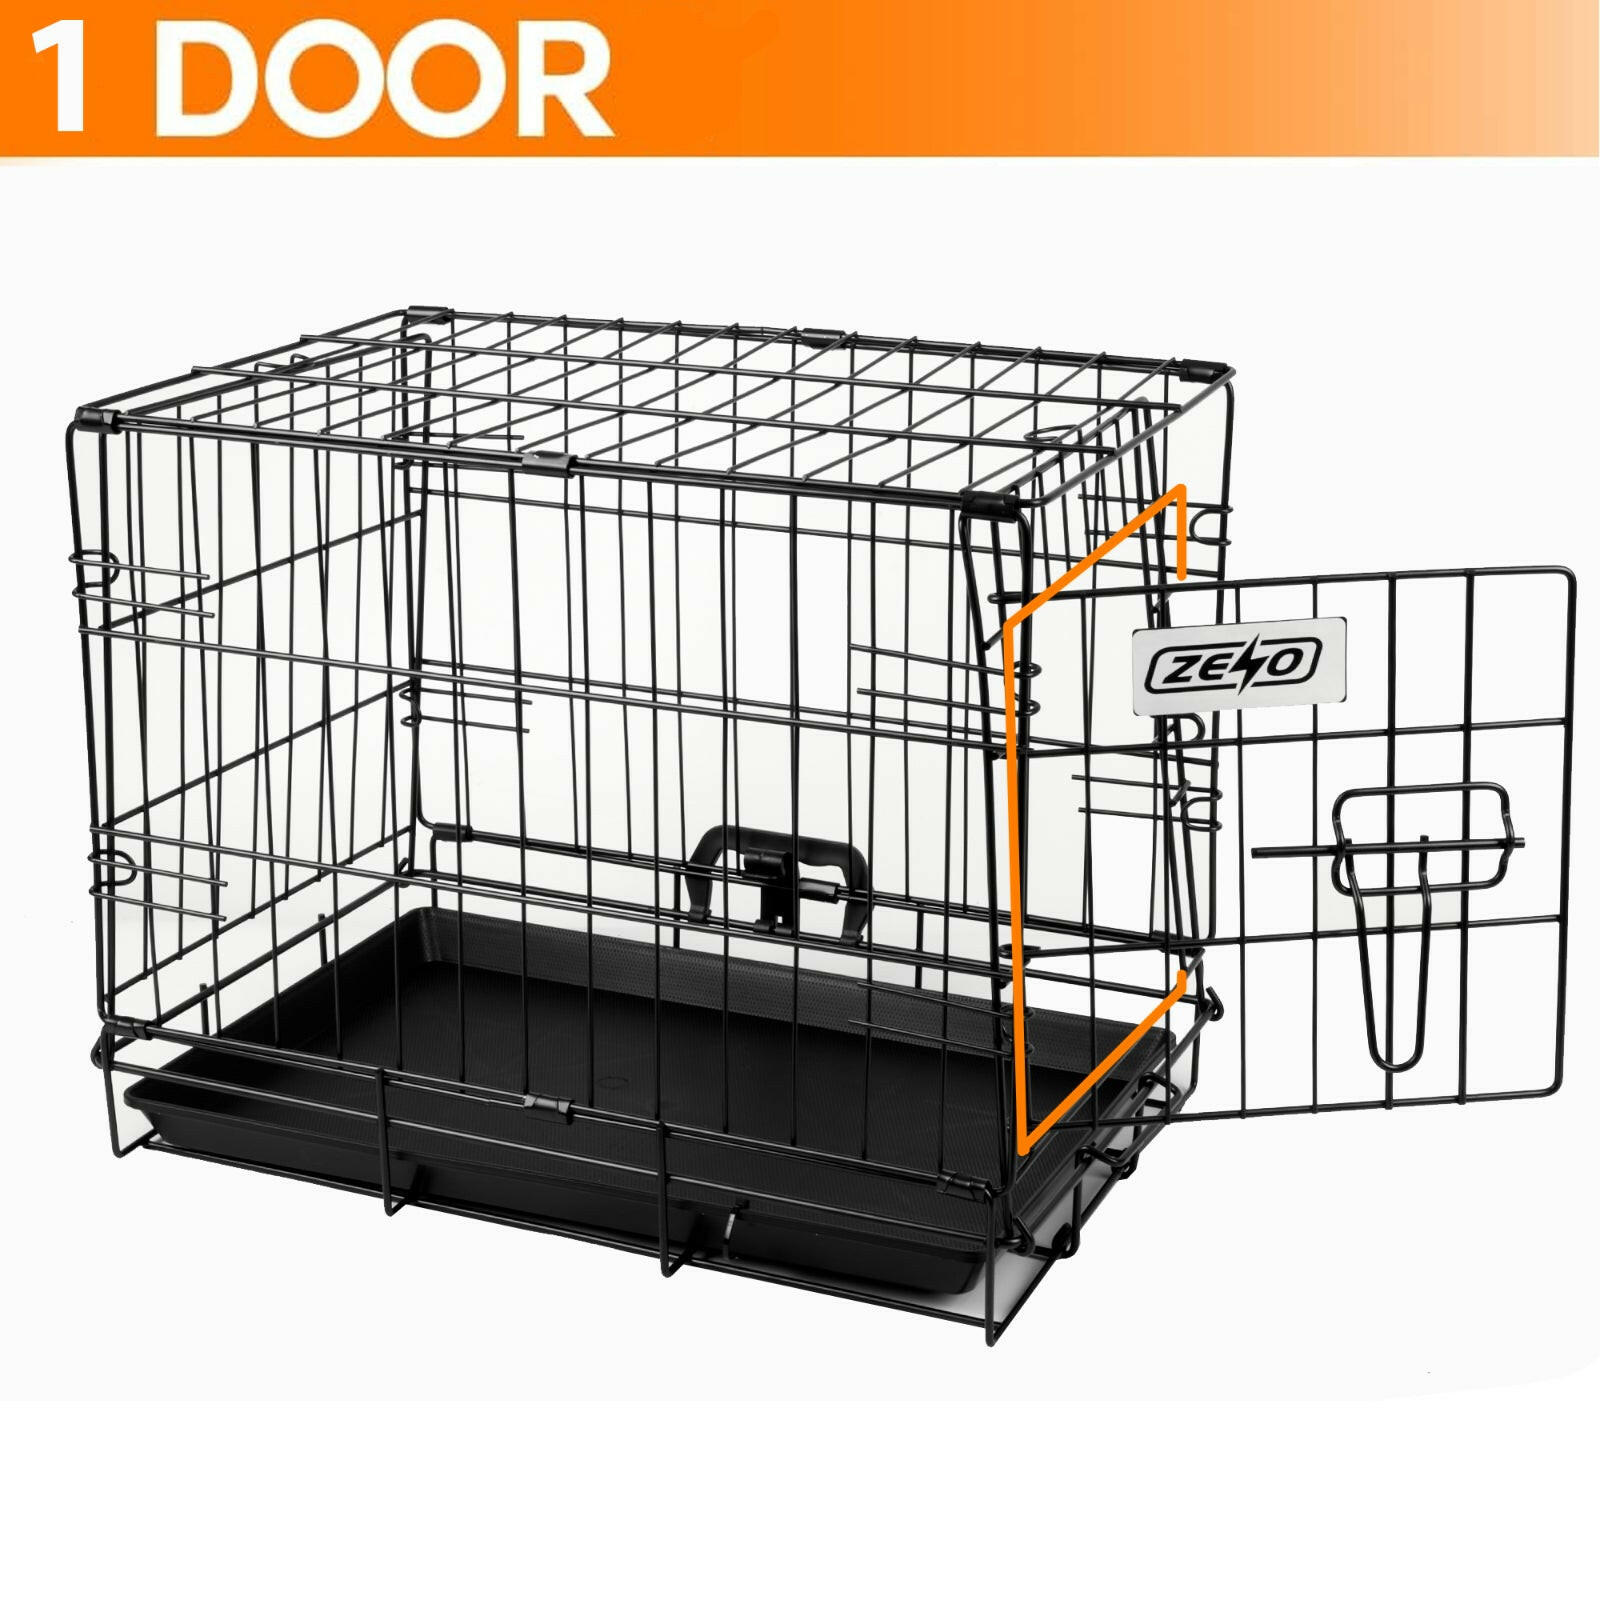 Durable Metal Dog Crate: Reliable Training Solution for Dogs of Any Size